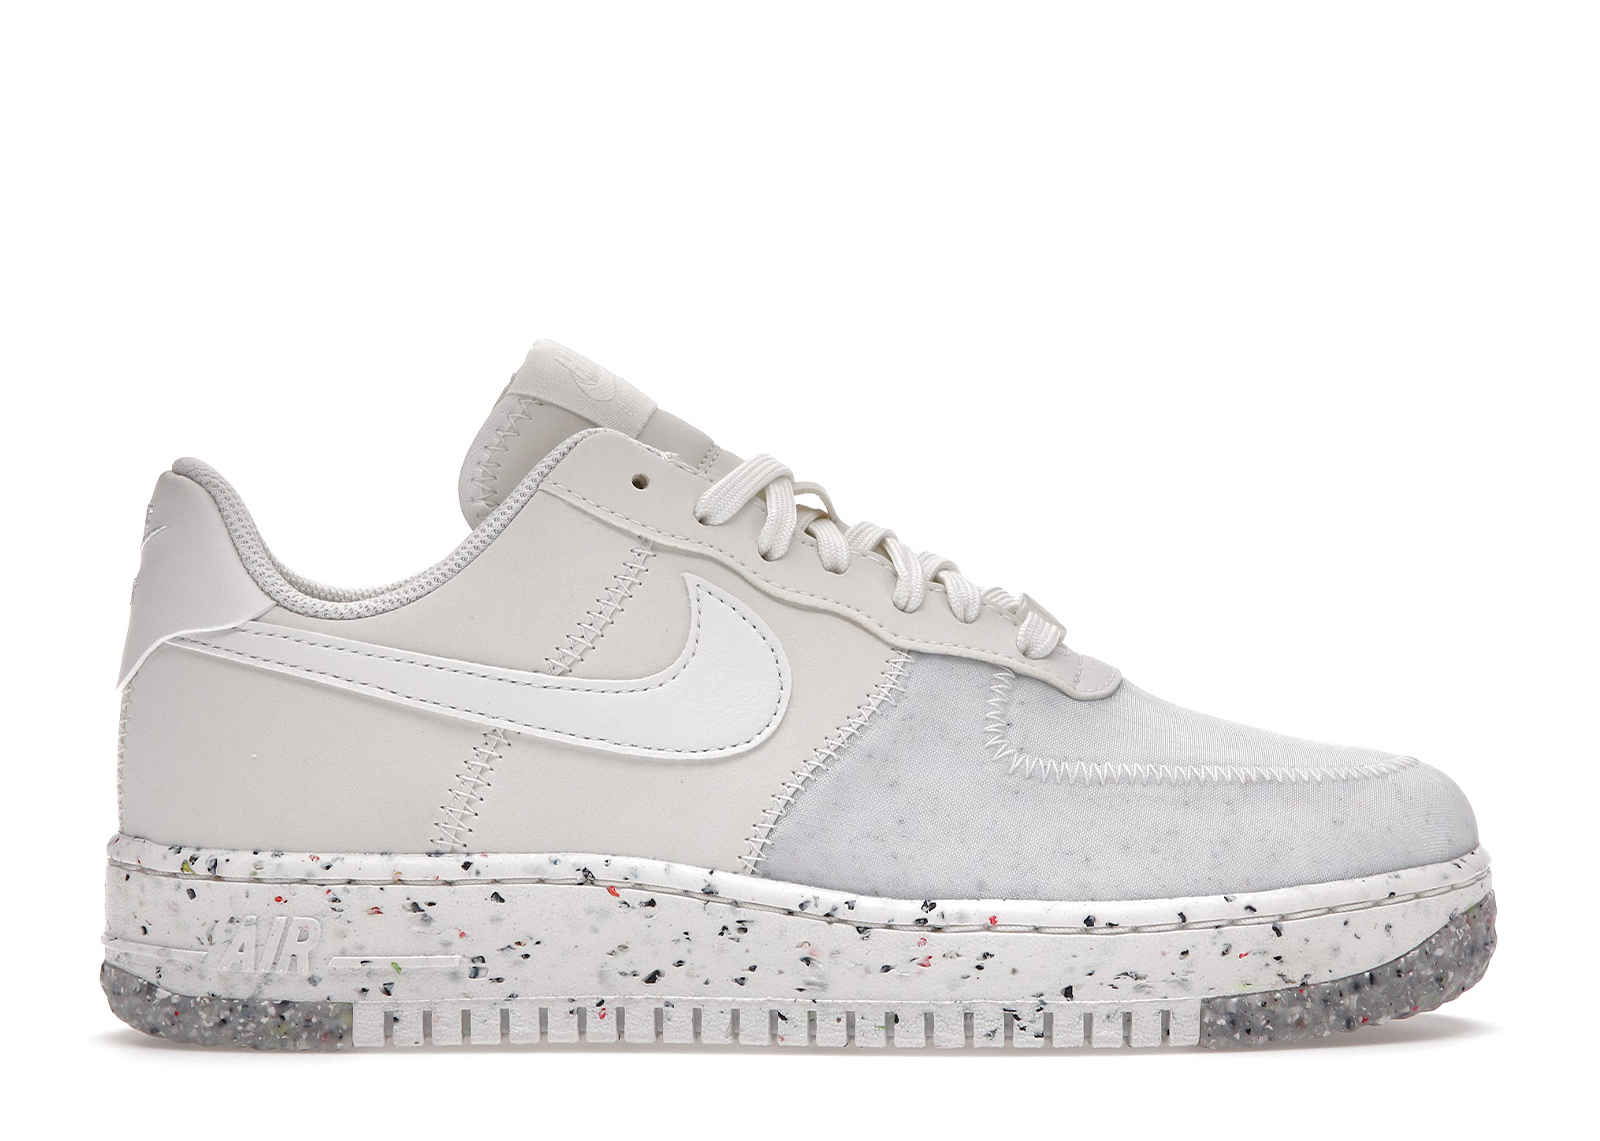 Nike Air Force 1 Crater Summit White (Women's) - CT1986-100 - US